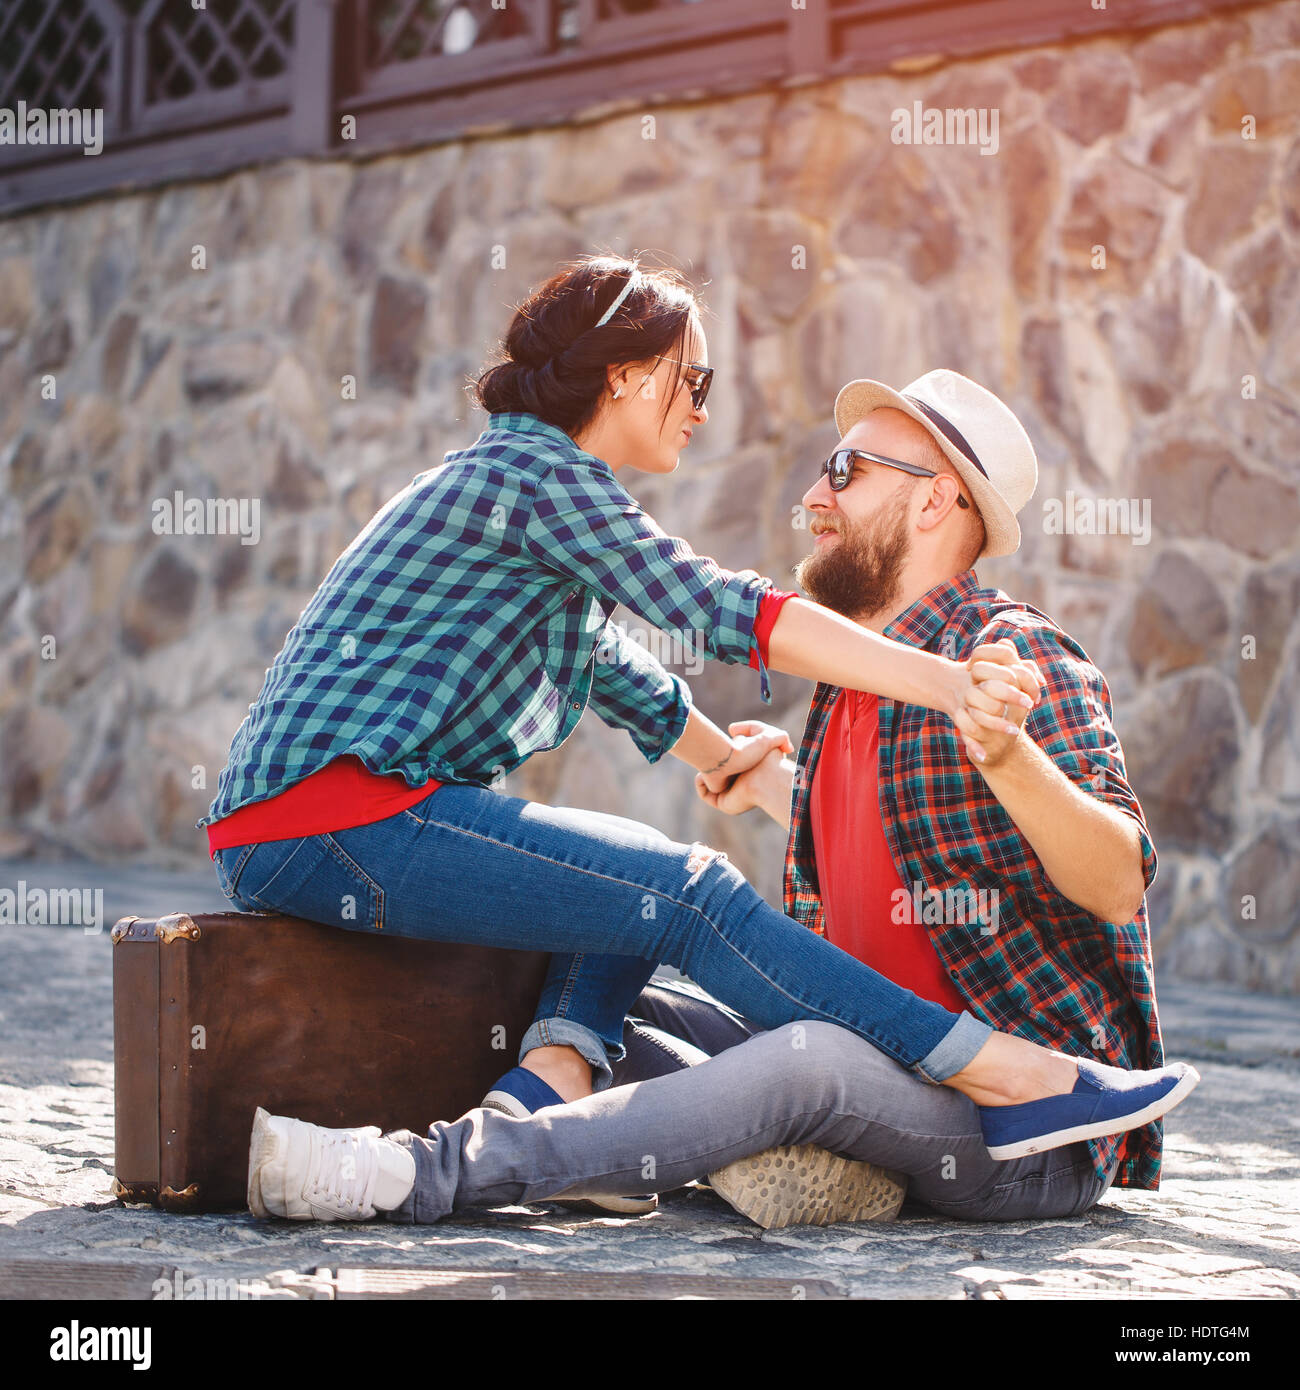 couple in love sitting on road with suitcase Stock Photo